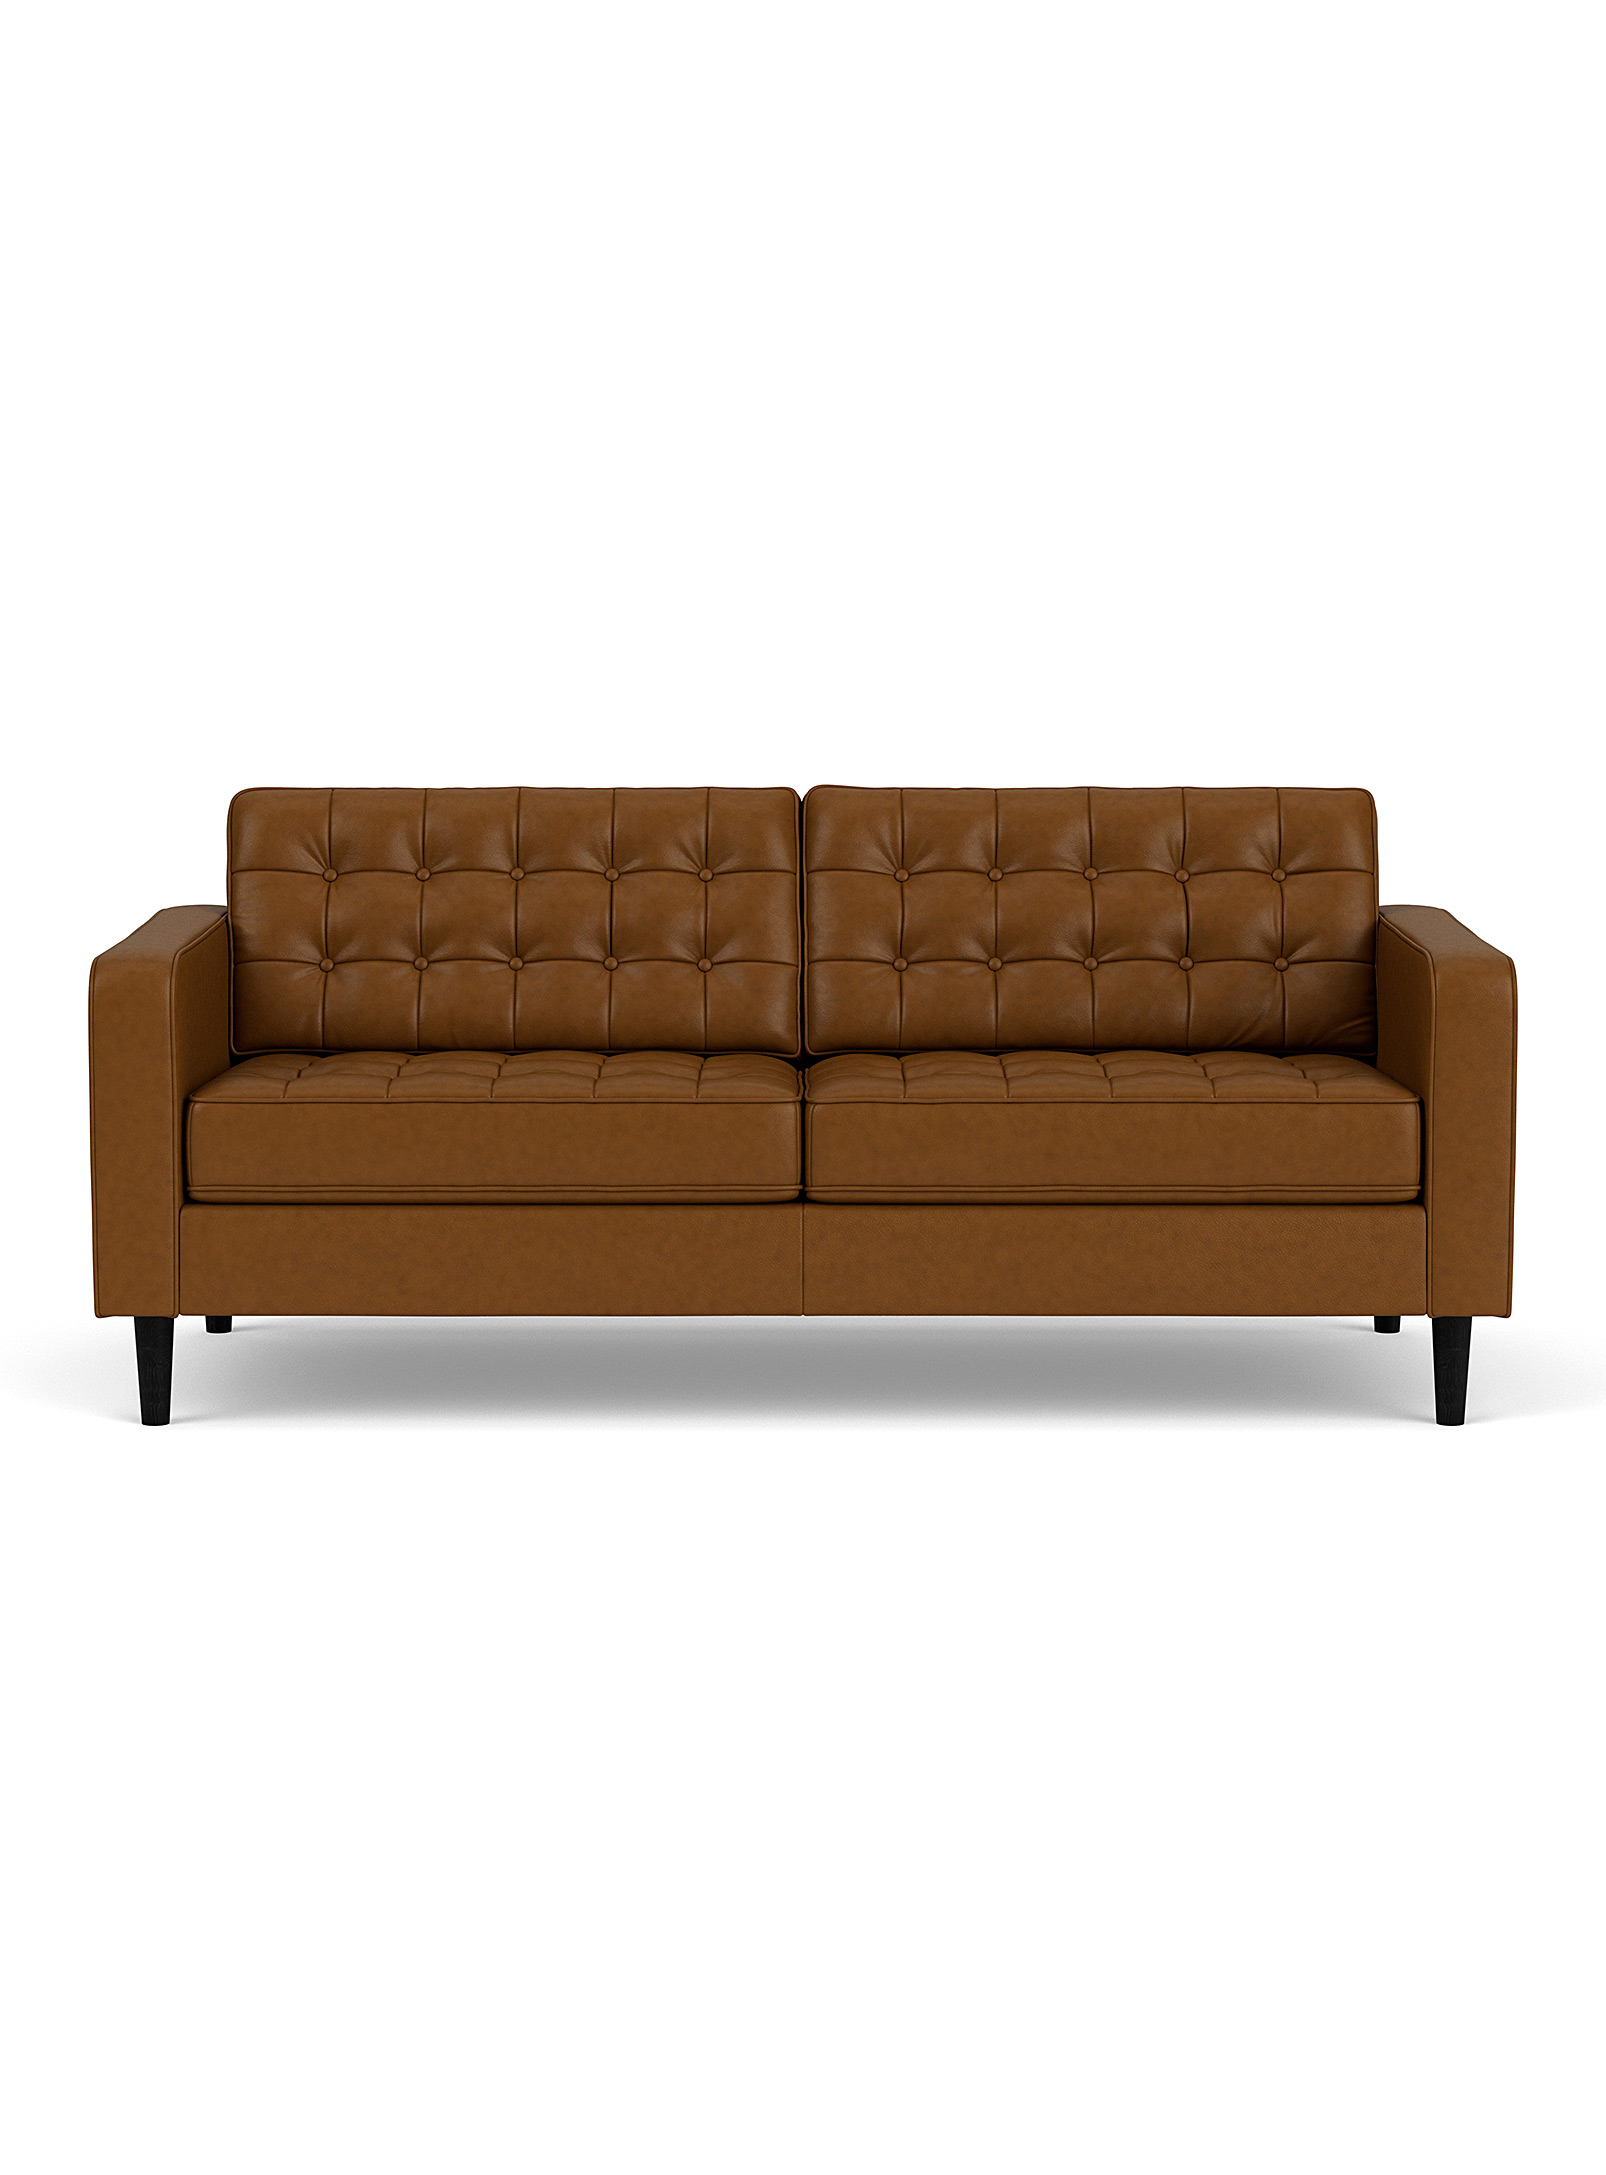 Eq3 Reverie Leather Upholstered Couch In Honey